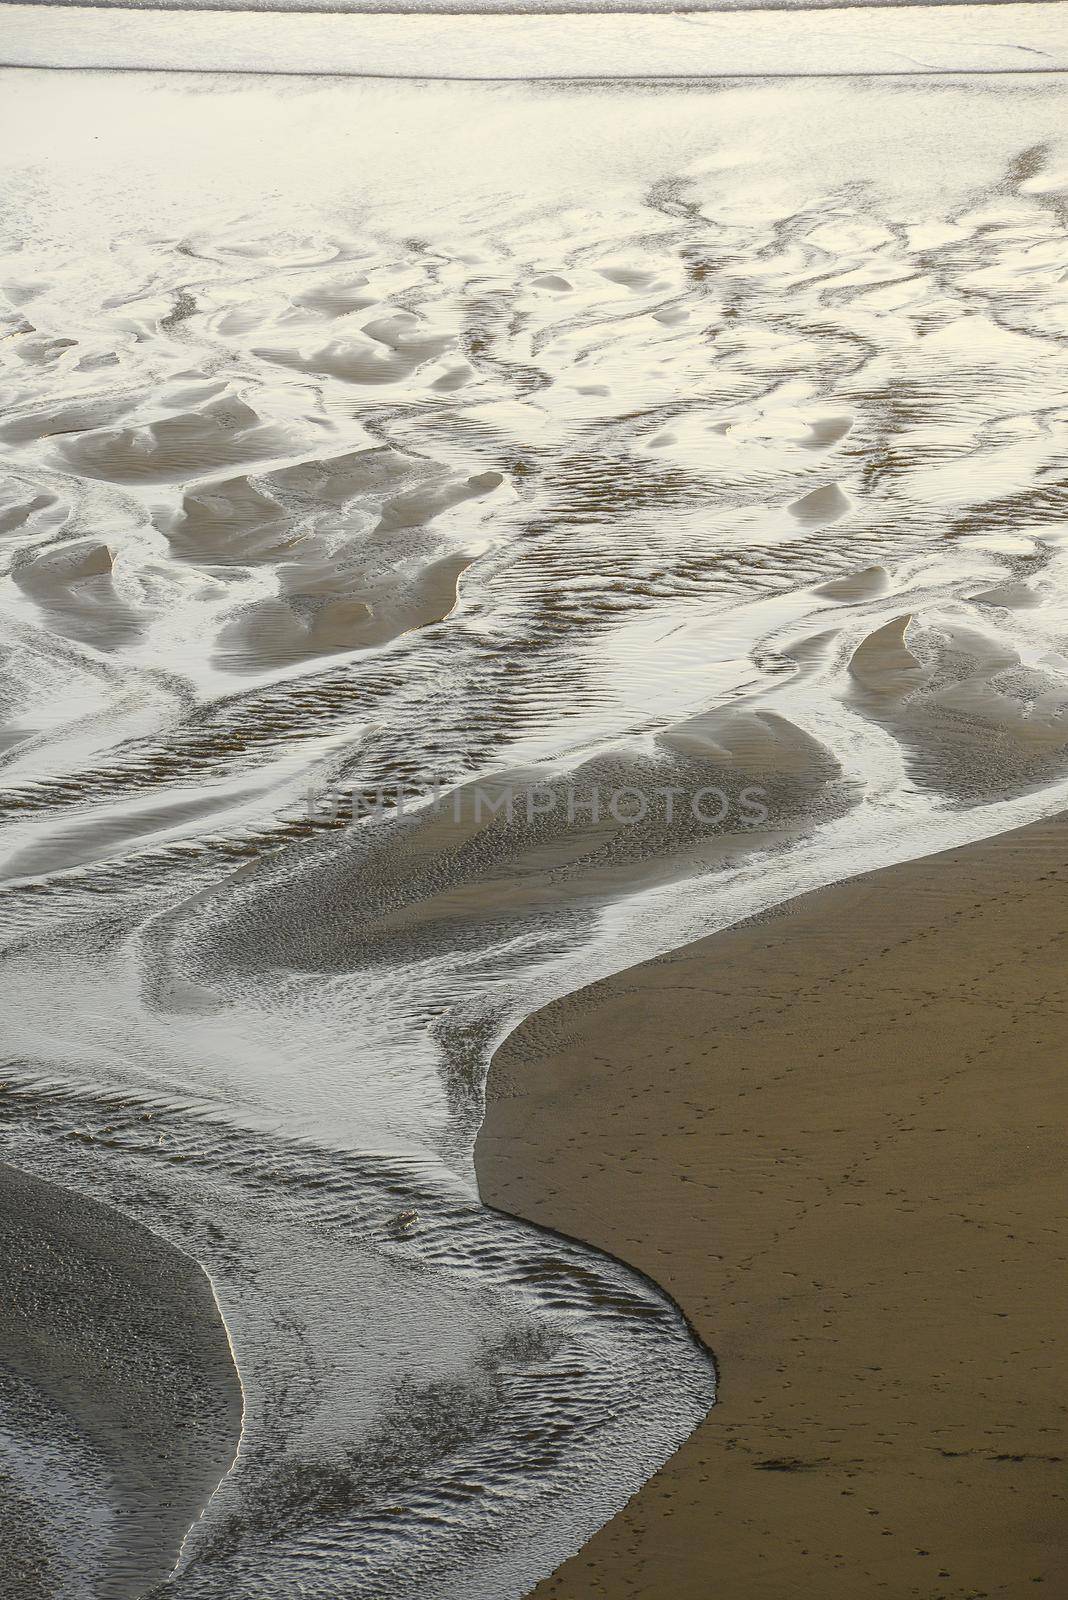 sand pattern from a creek flowing on a beach